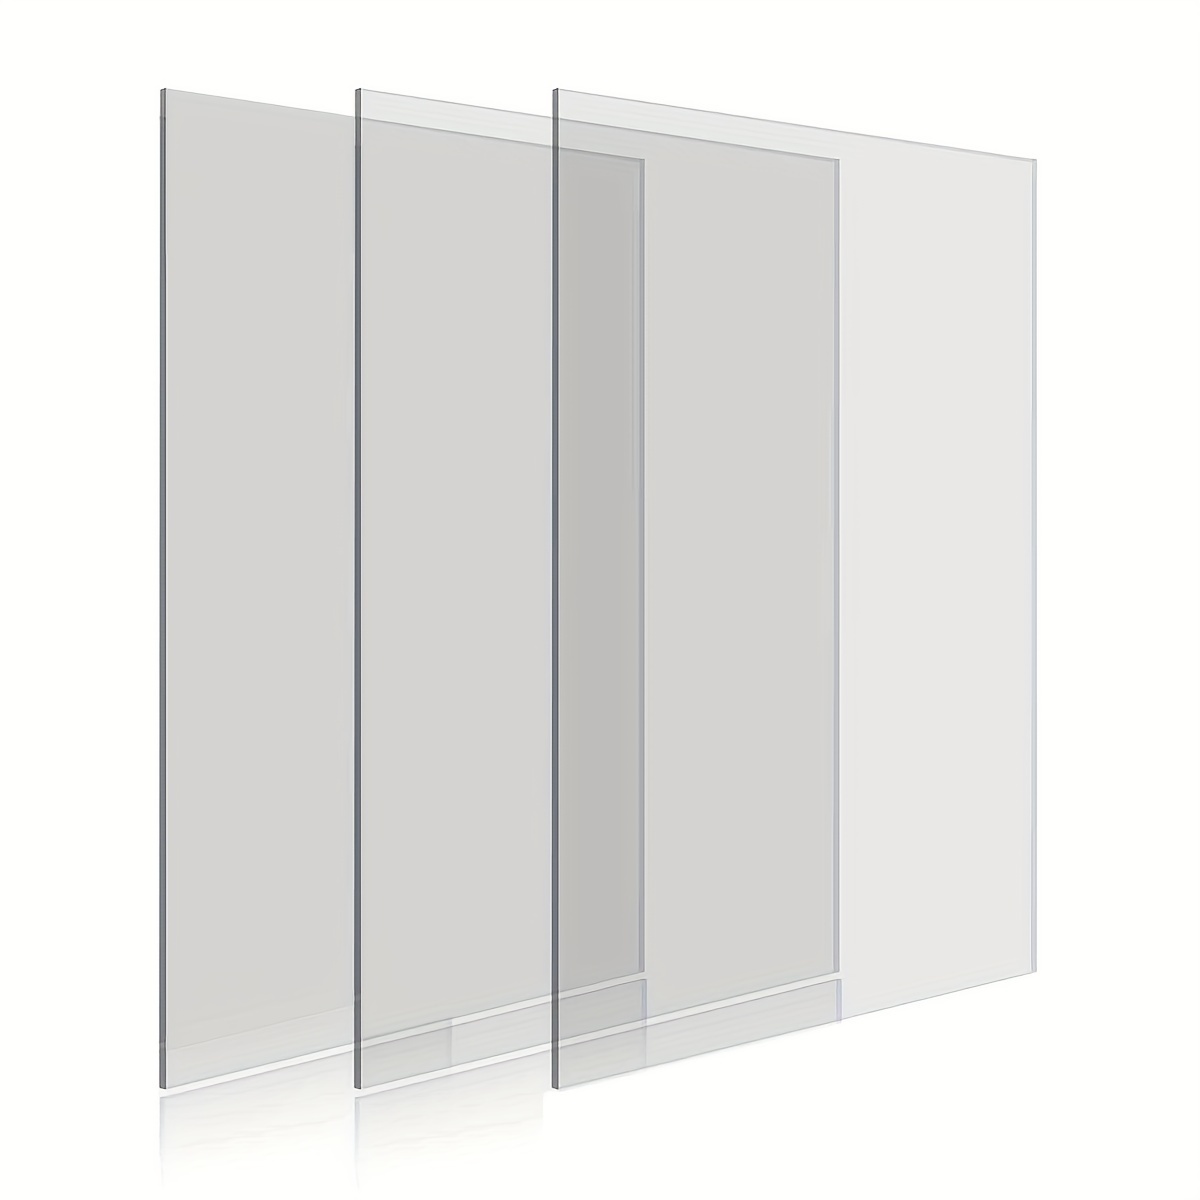 5pcs, 16x20x0.04 Clear Plastic Sheet, Replacement For Picture Photo  Frames, Transparent Polyethylene Flexible Plastic Acrylic Sheets Panels For  Arts And Crafts, Blank, For Diy Display Project, Shop The Latest Trends